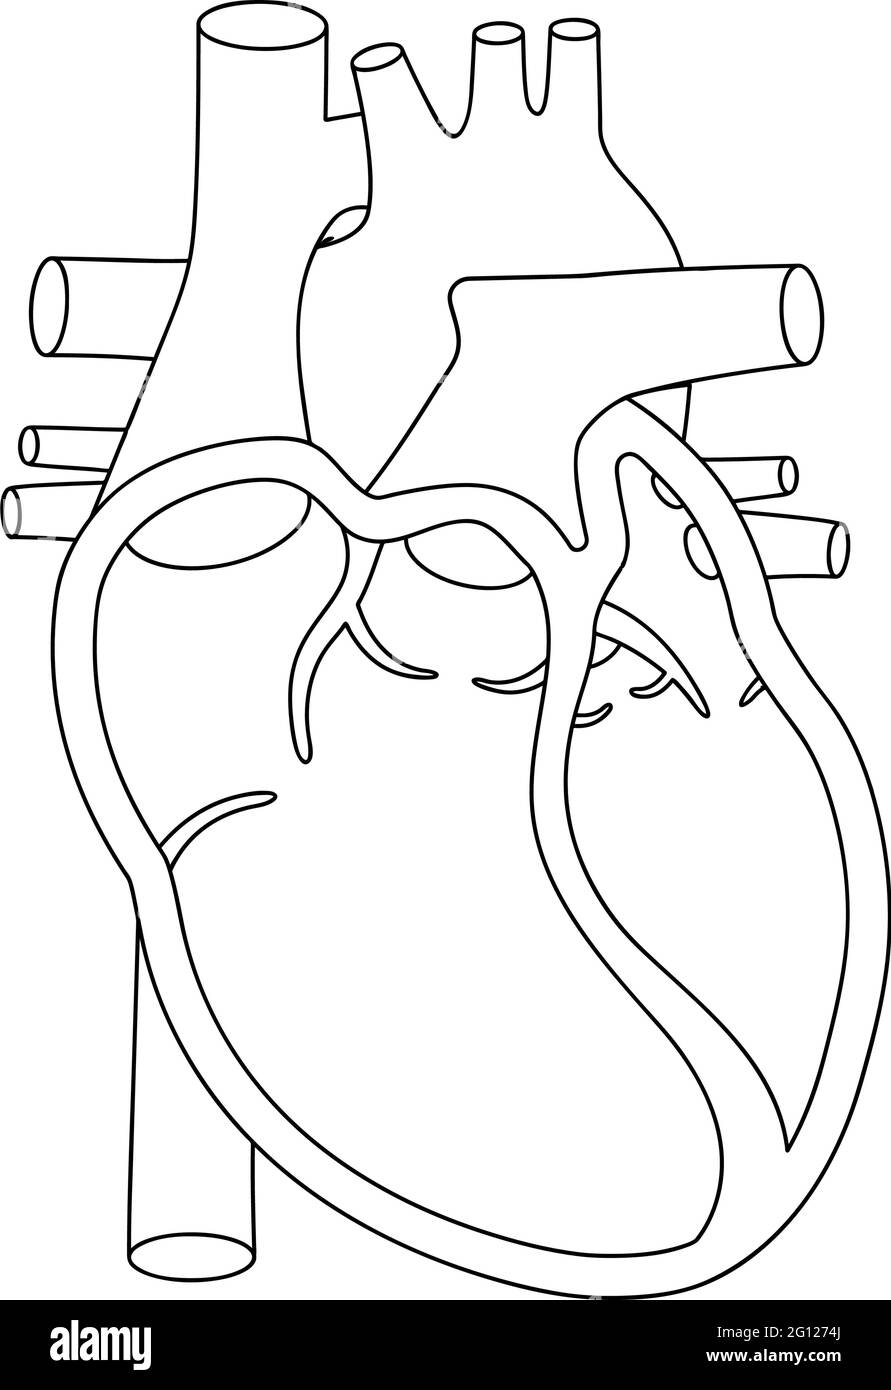 Human heart illustration. Anatomically correct heart with cross-section ...